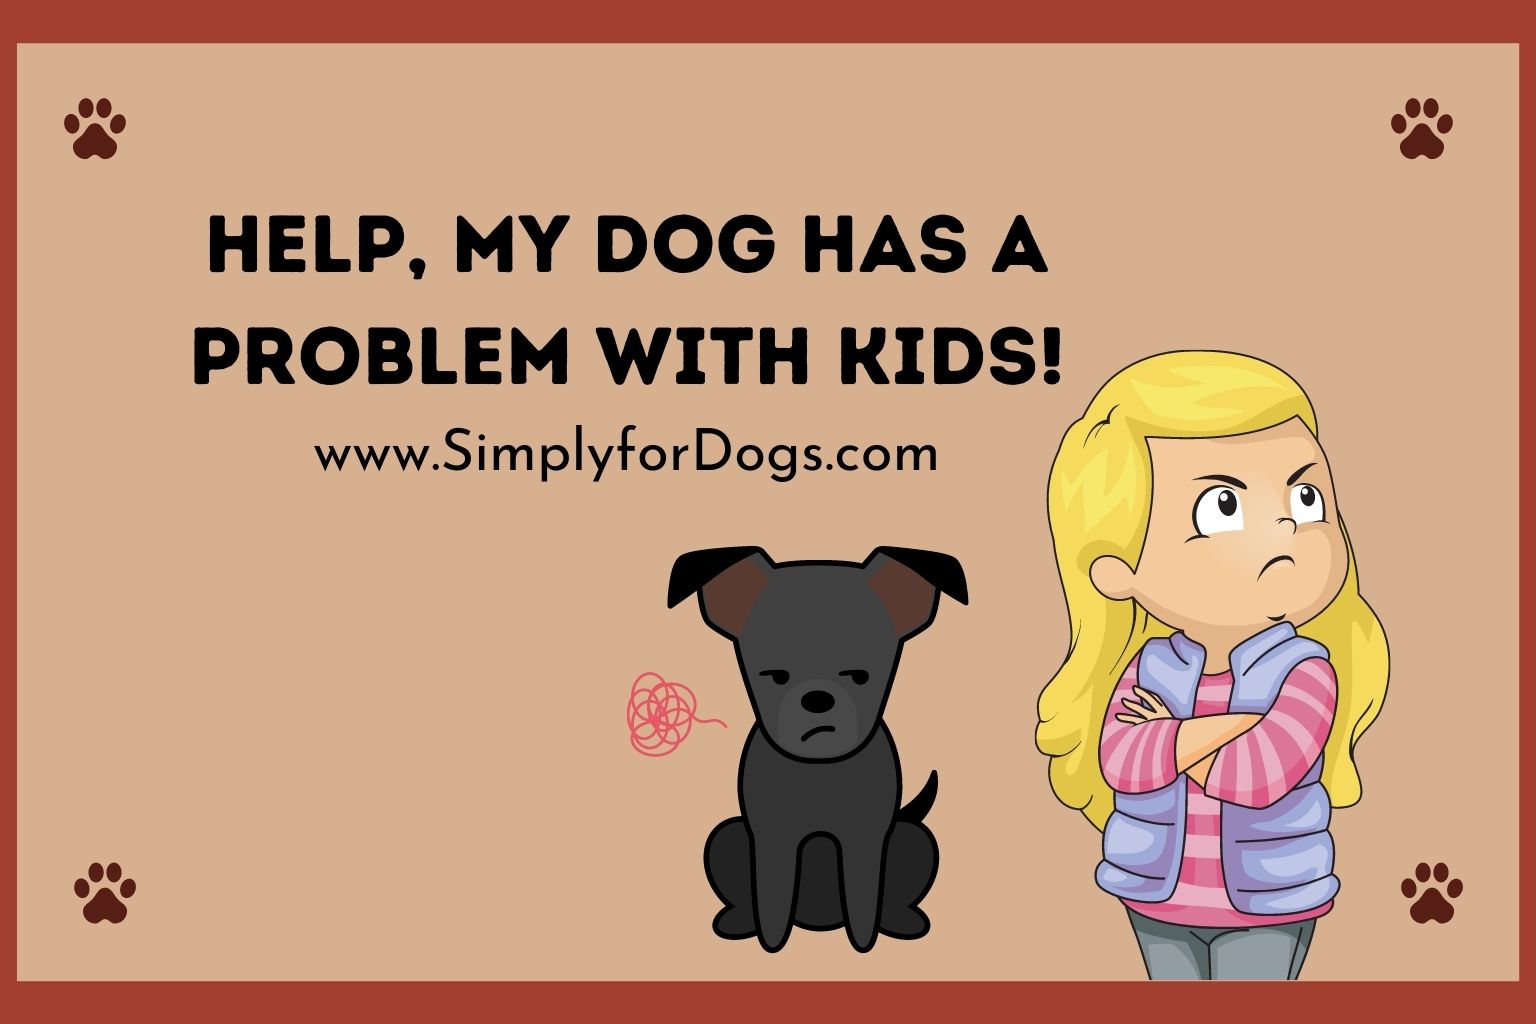 Help, My Dog Has a Problem With Kids!